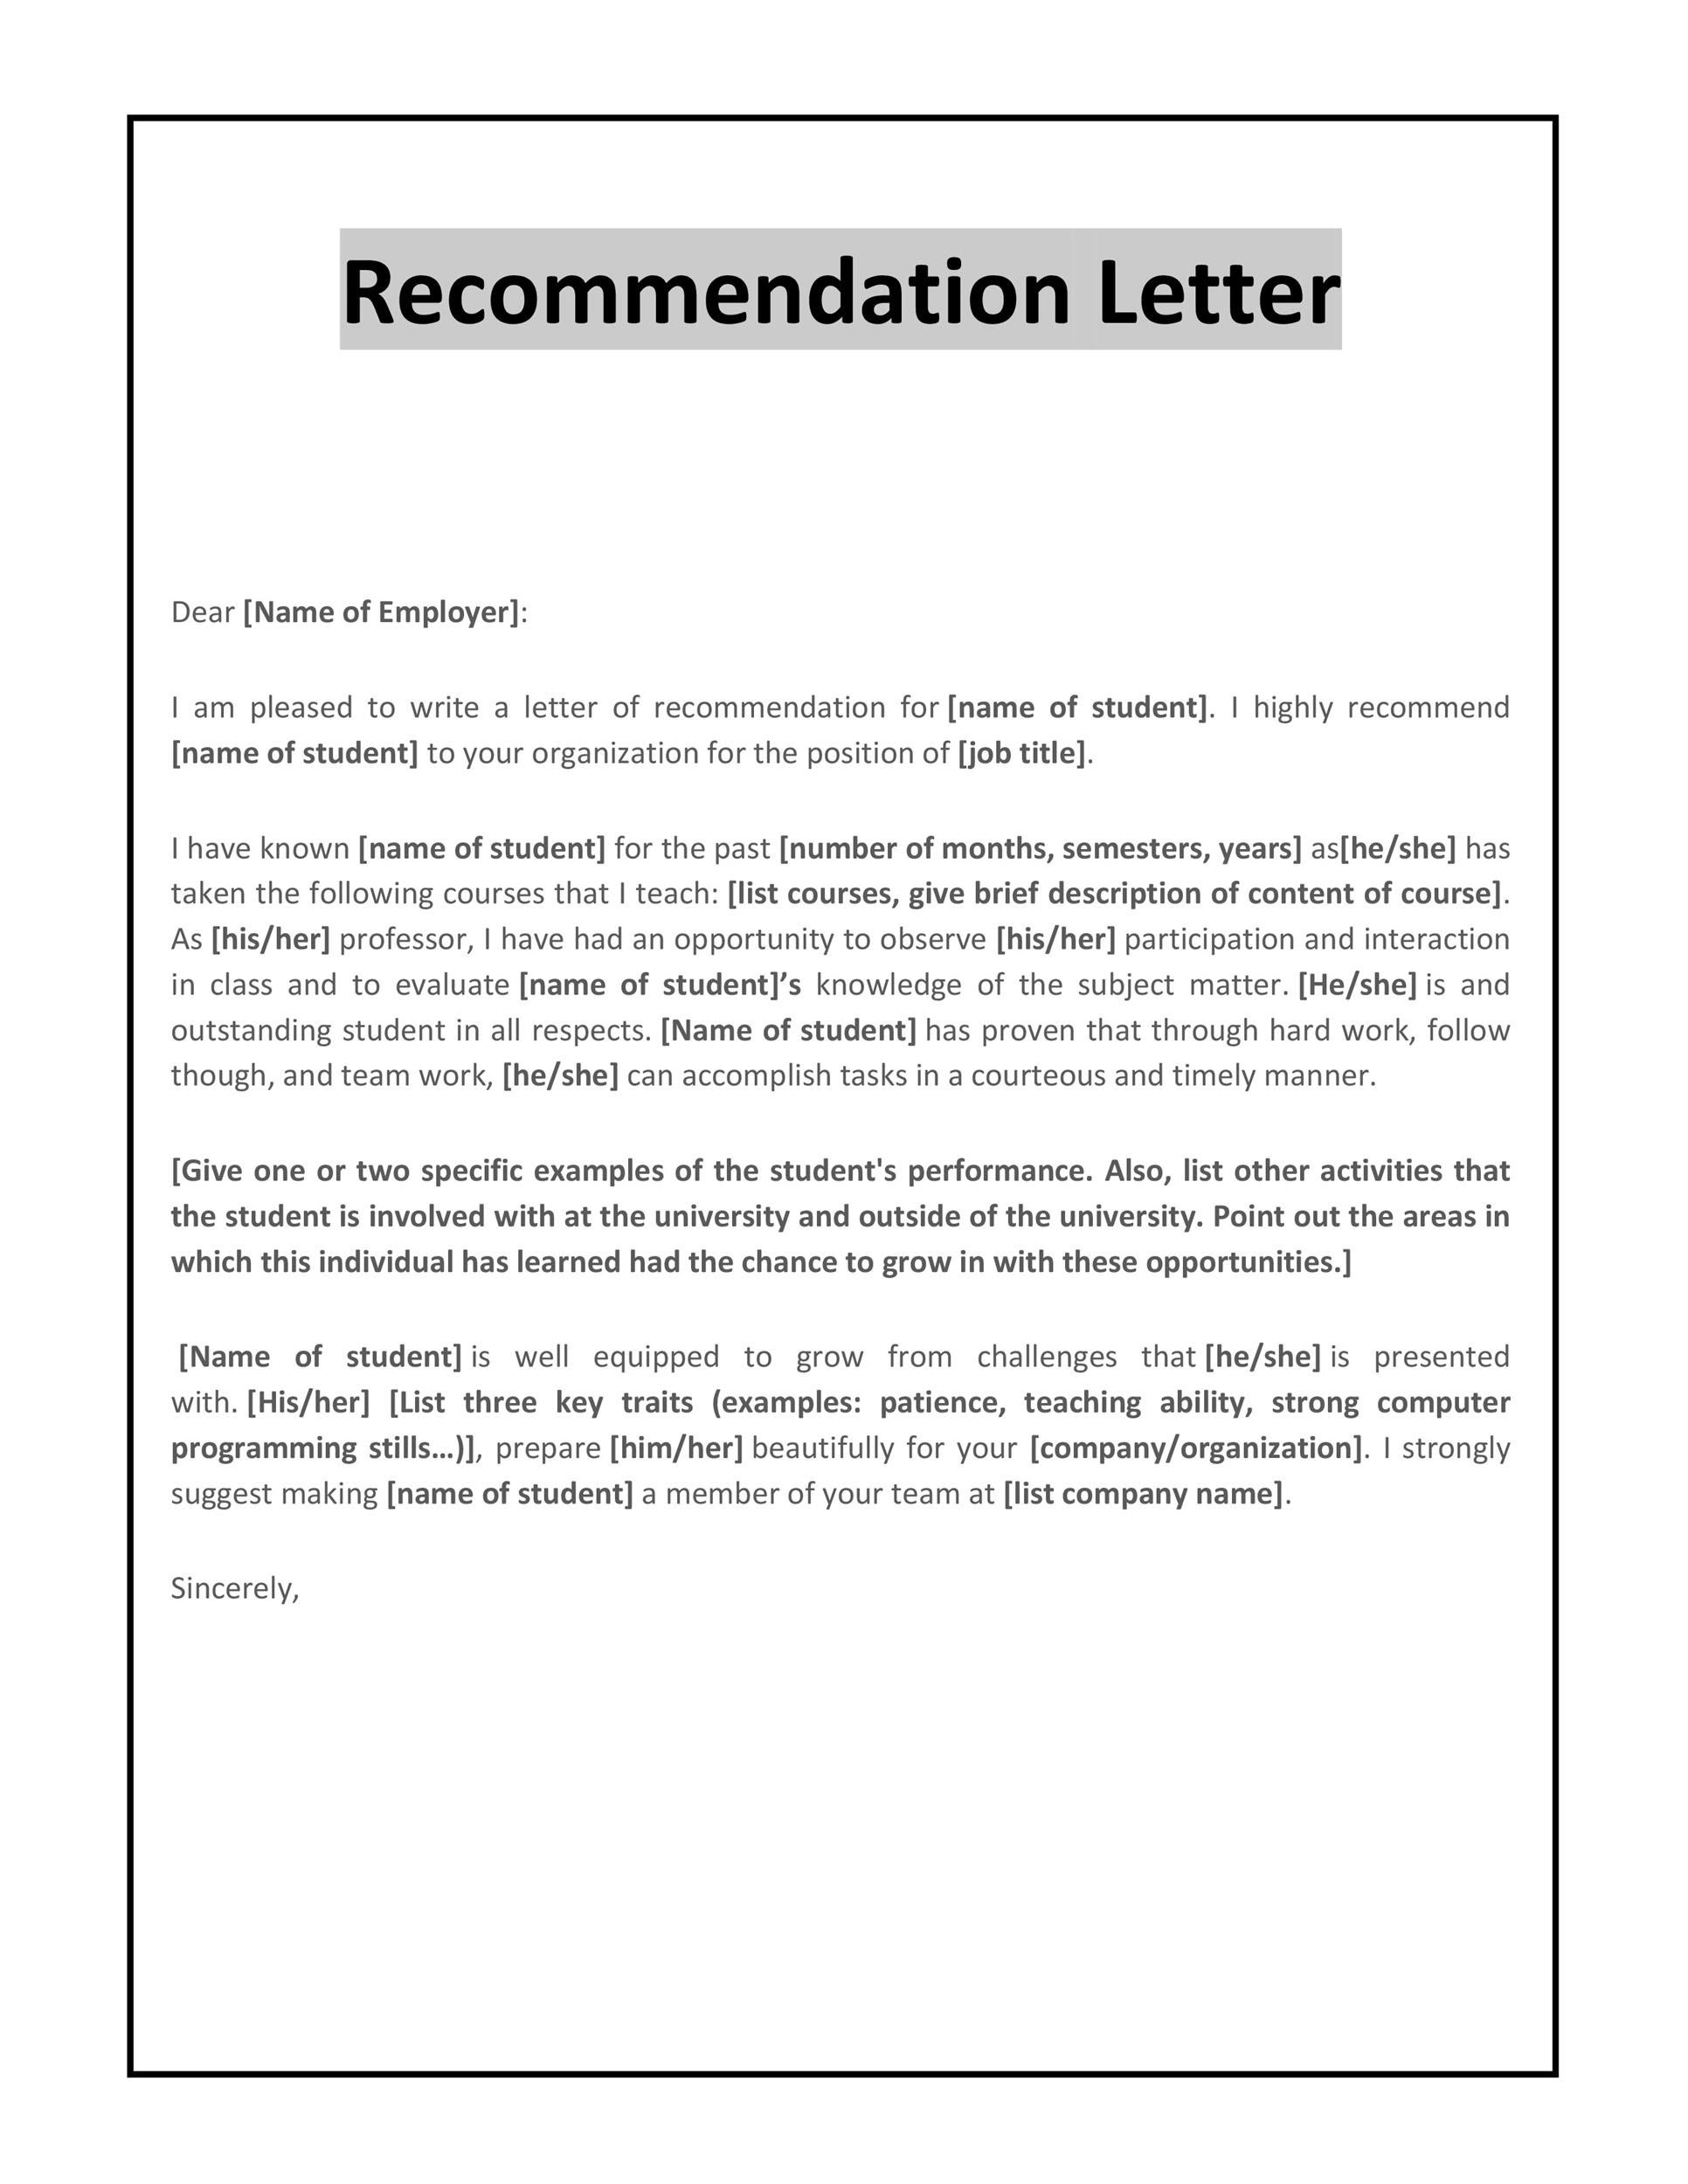 Emigrate or immigrate: Reference letter sample